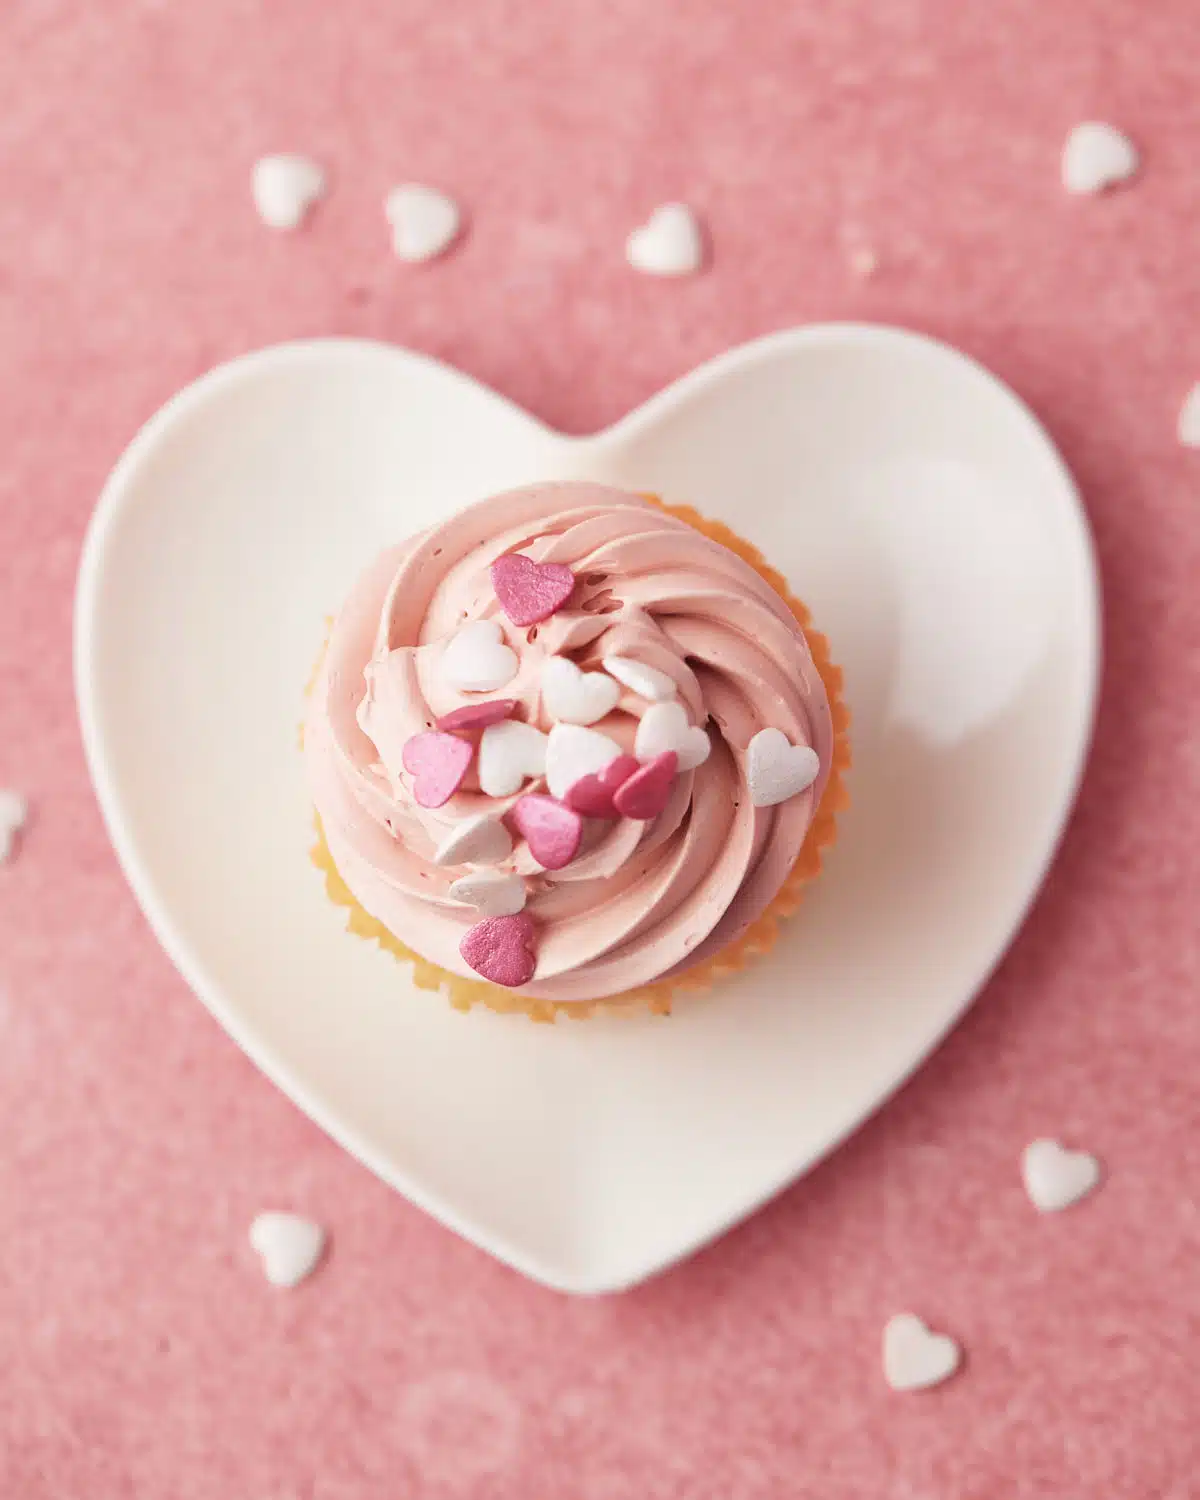 Valentines cupcake with pink frosting on a heart shaped plate, shot from above. 